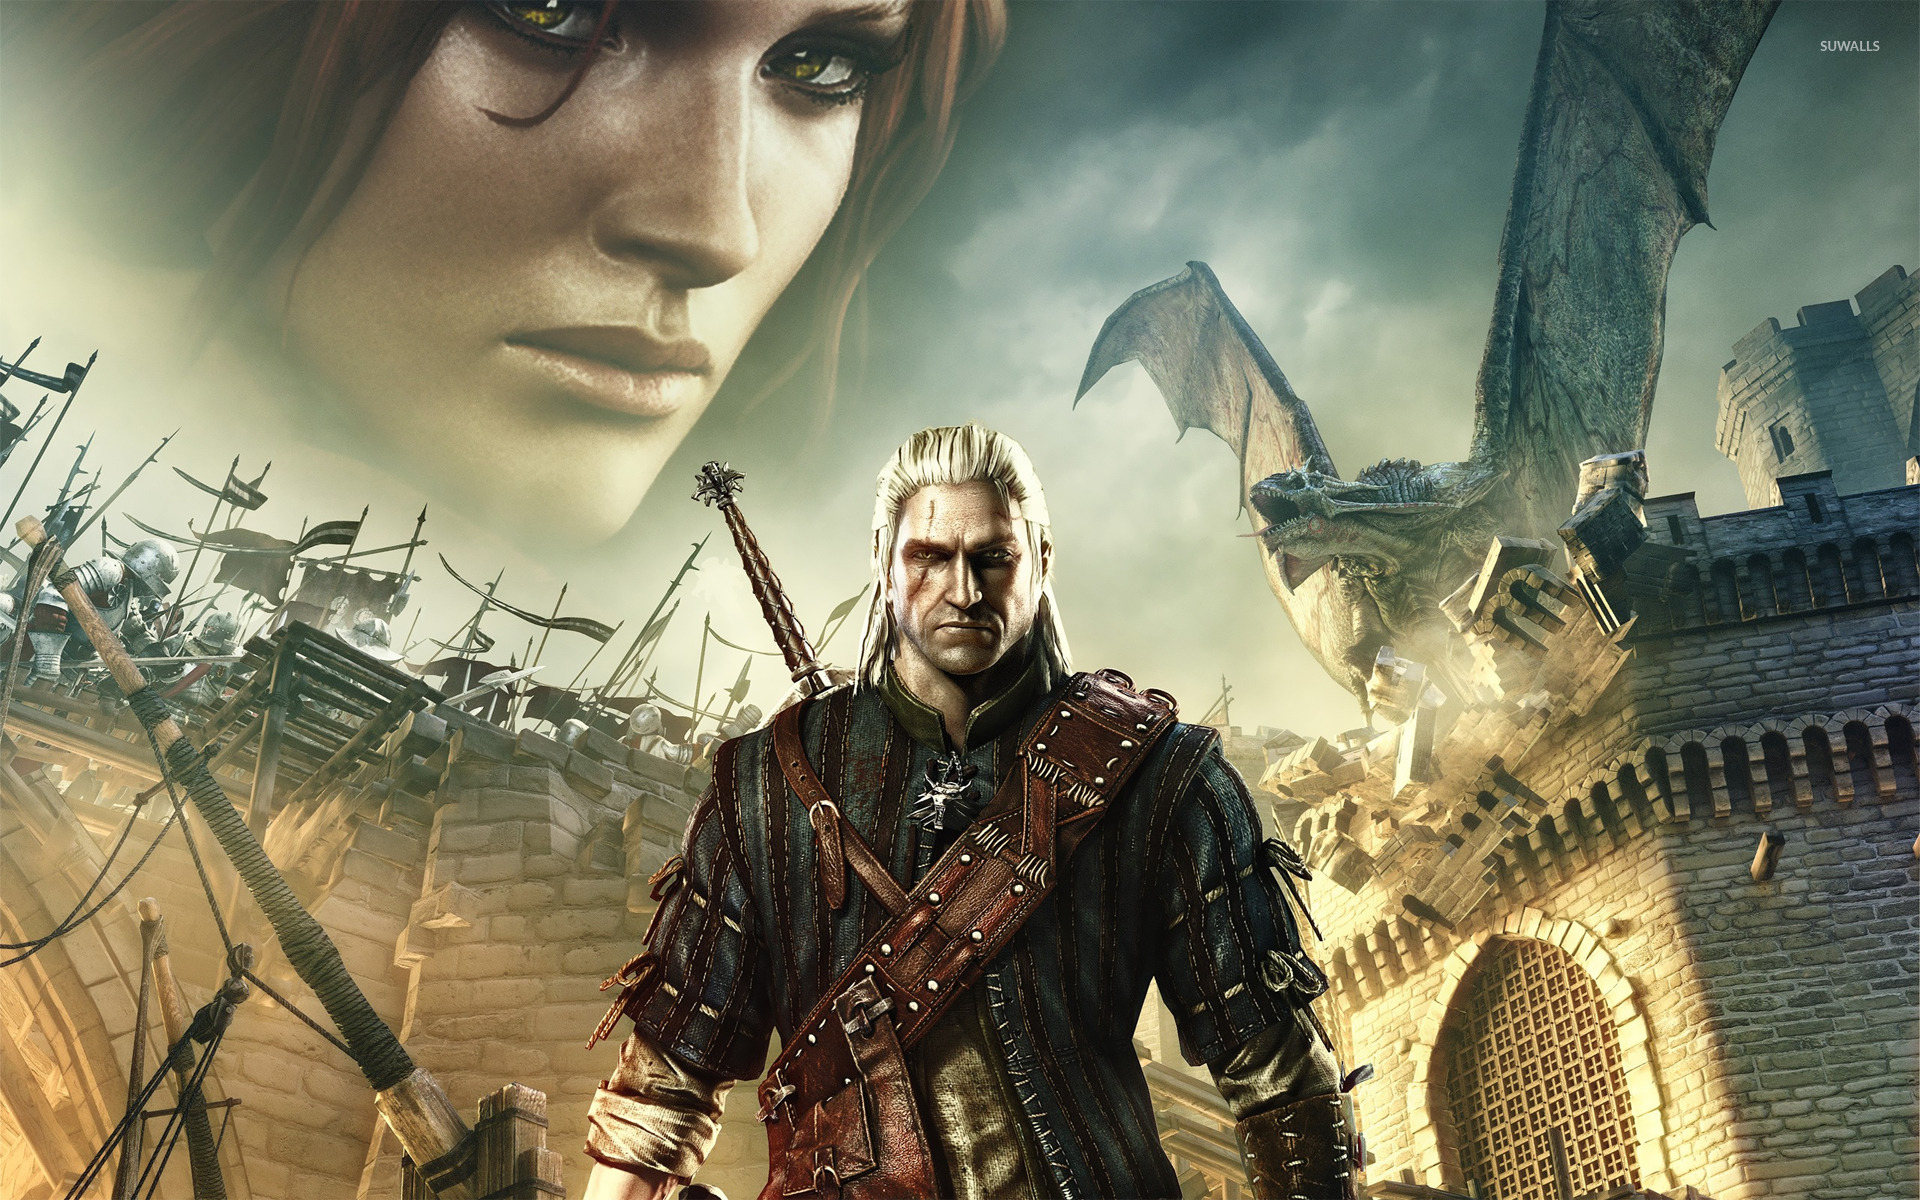 witcher 2 assassins of kings